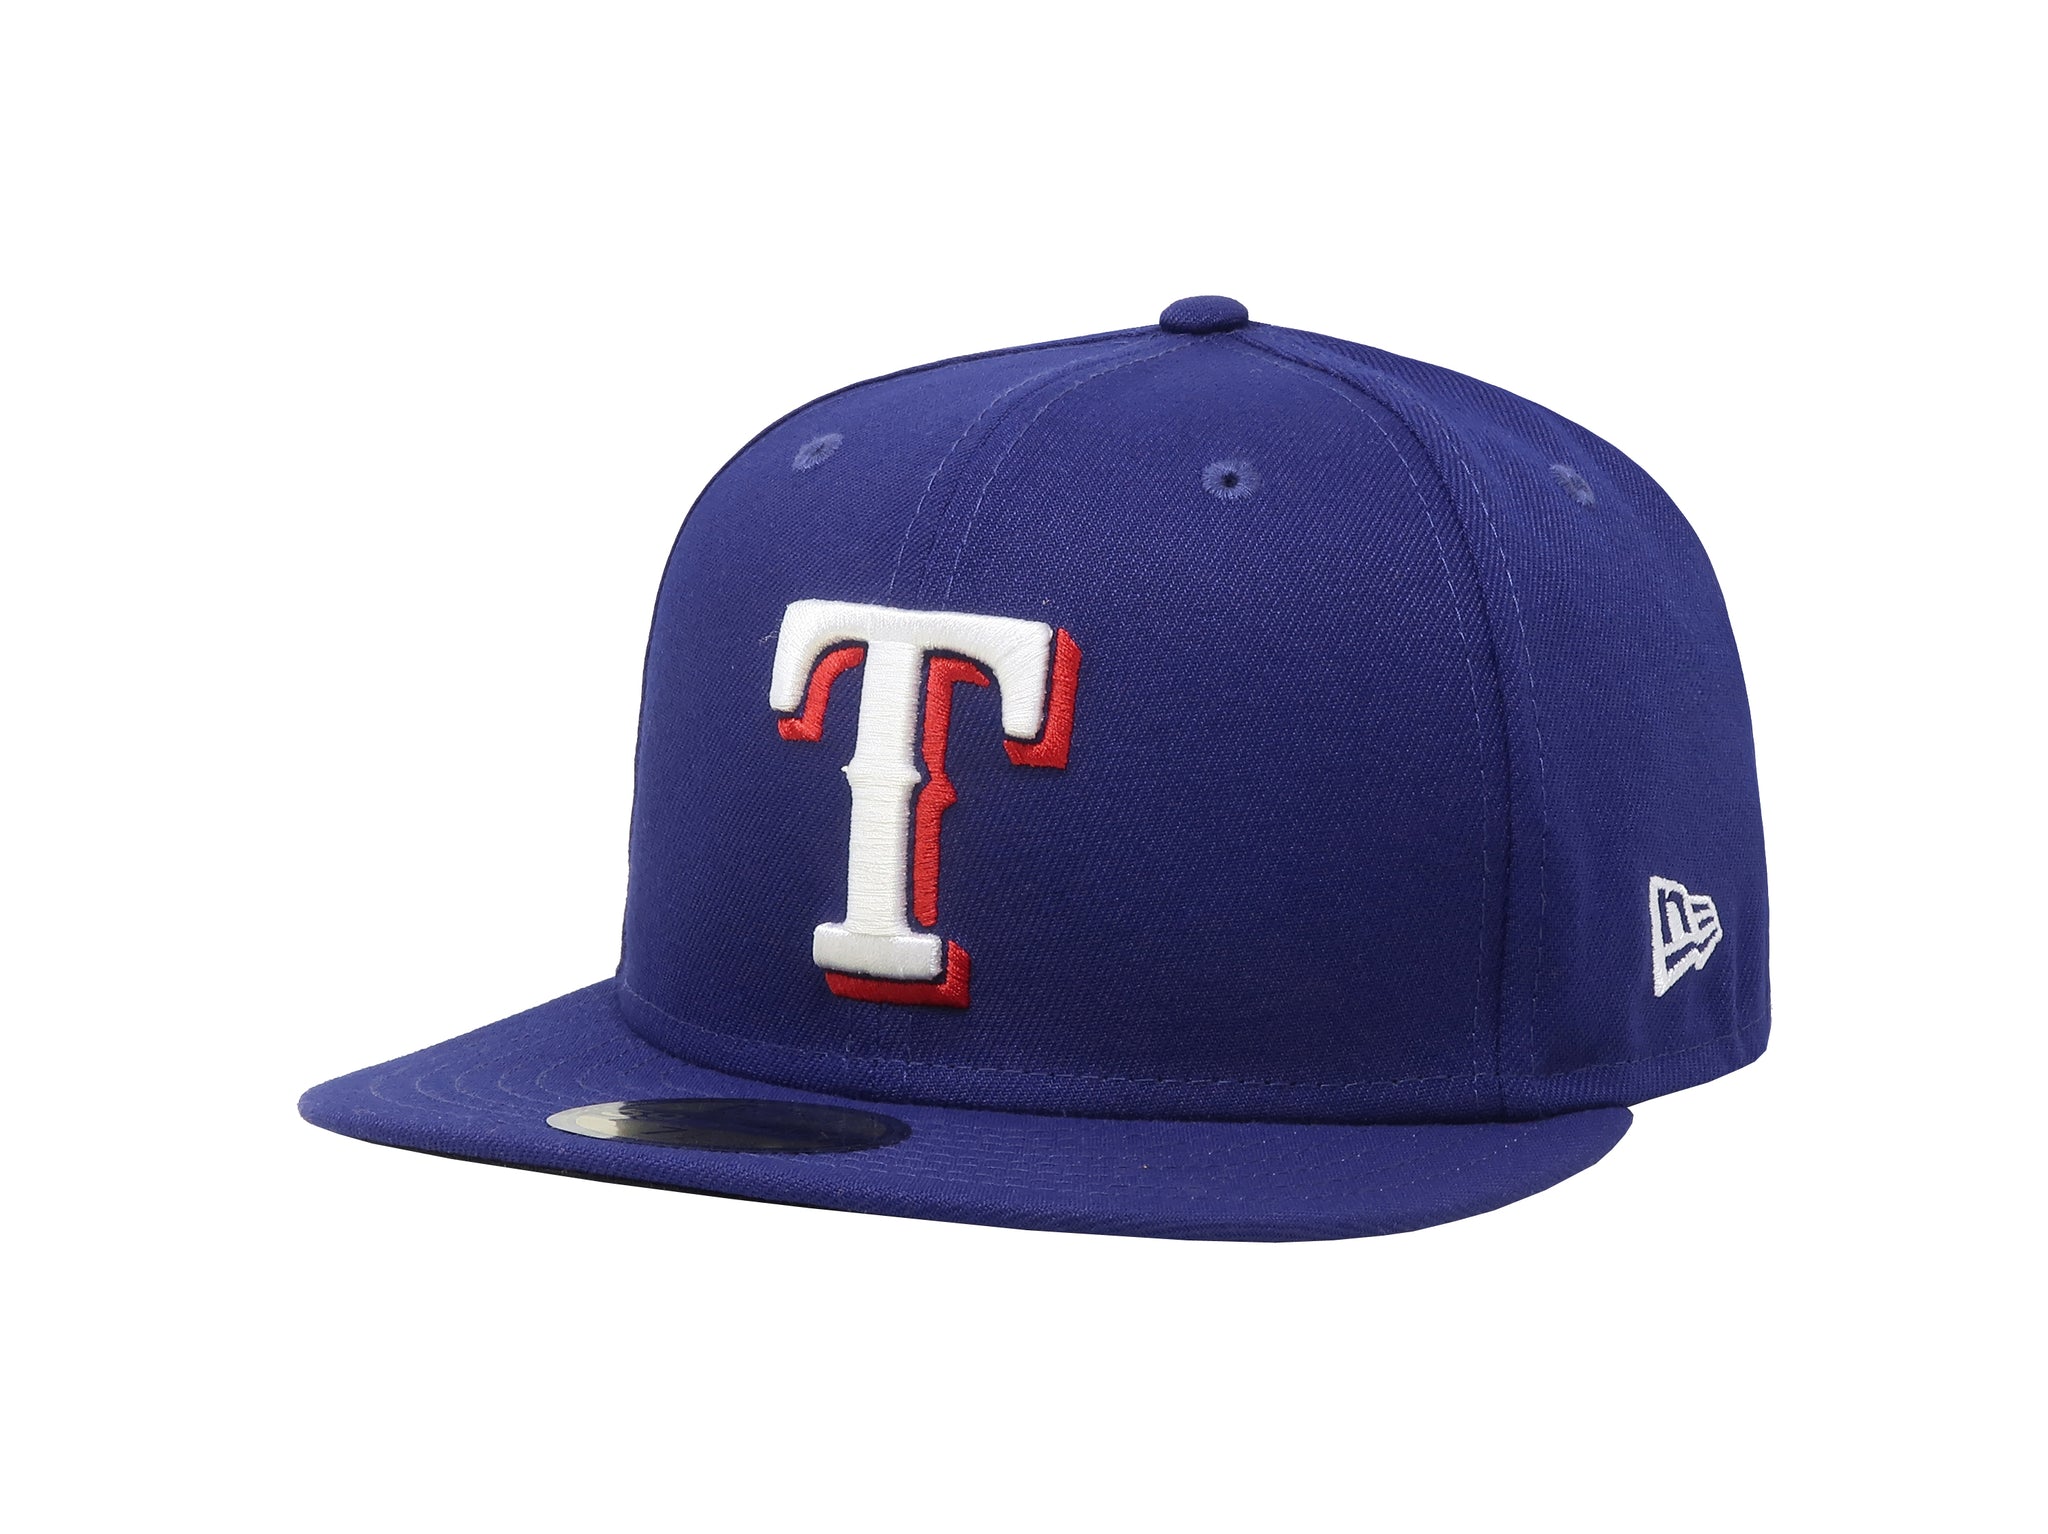 New Era 59Fifty Men's Texas Rangers Royal Fitted Game Cap